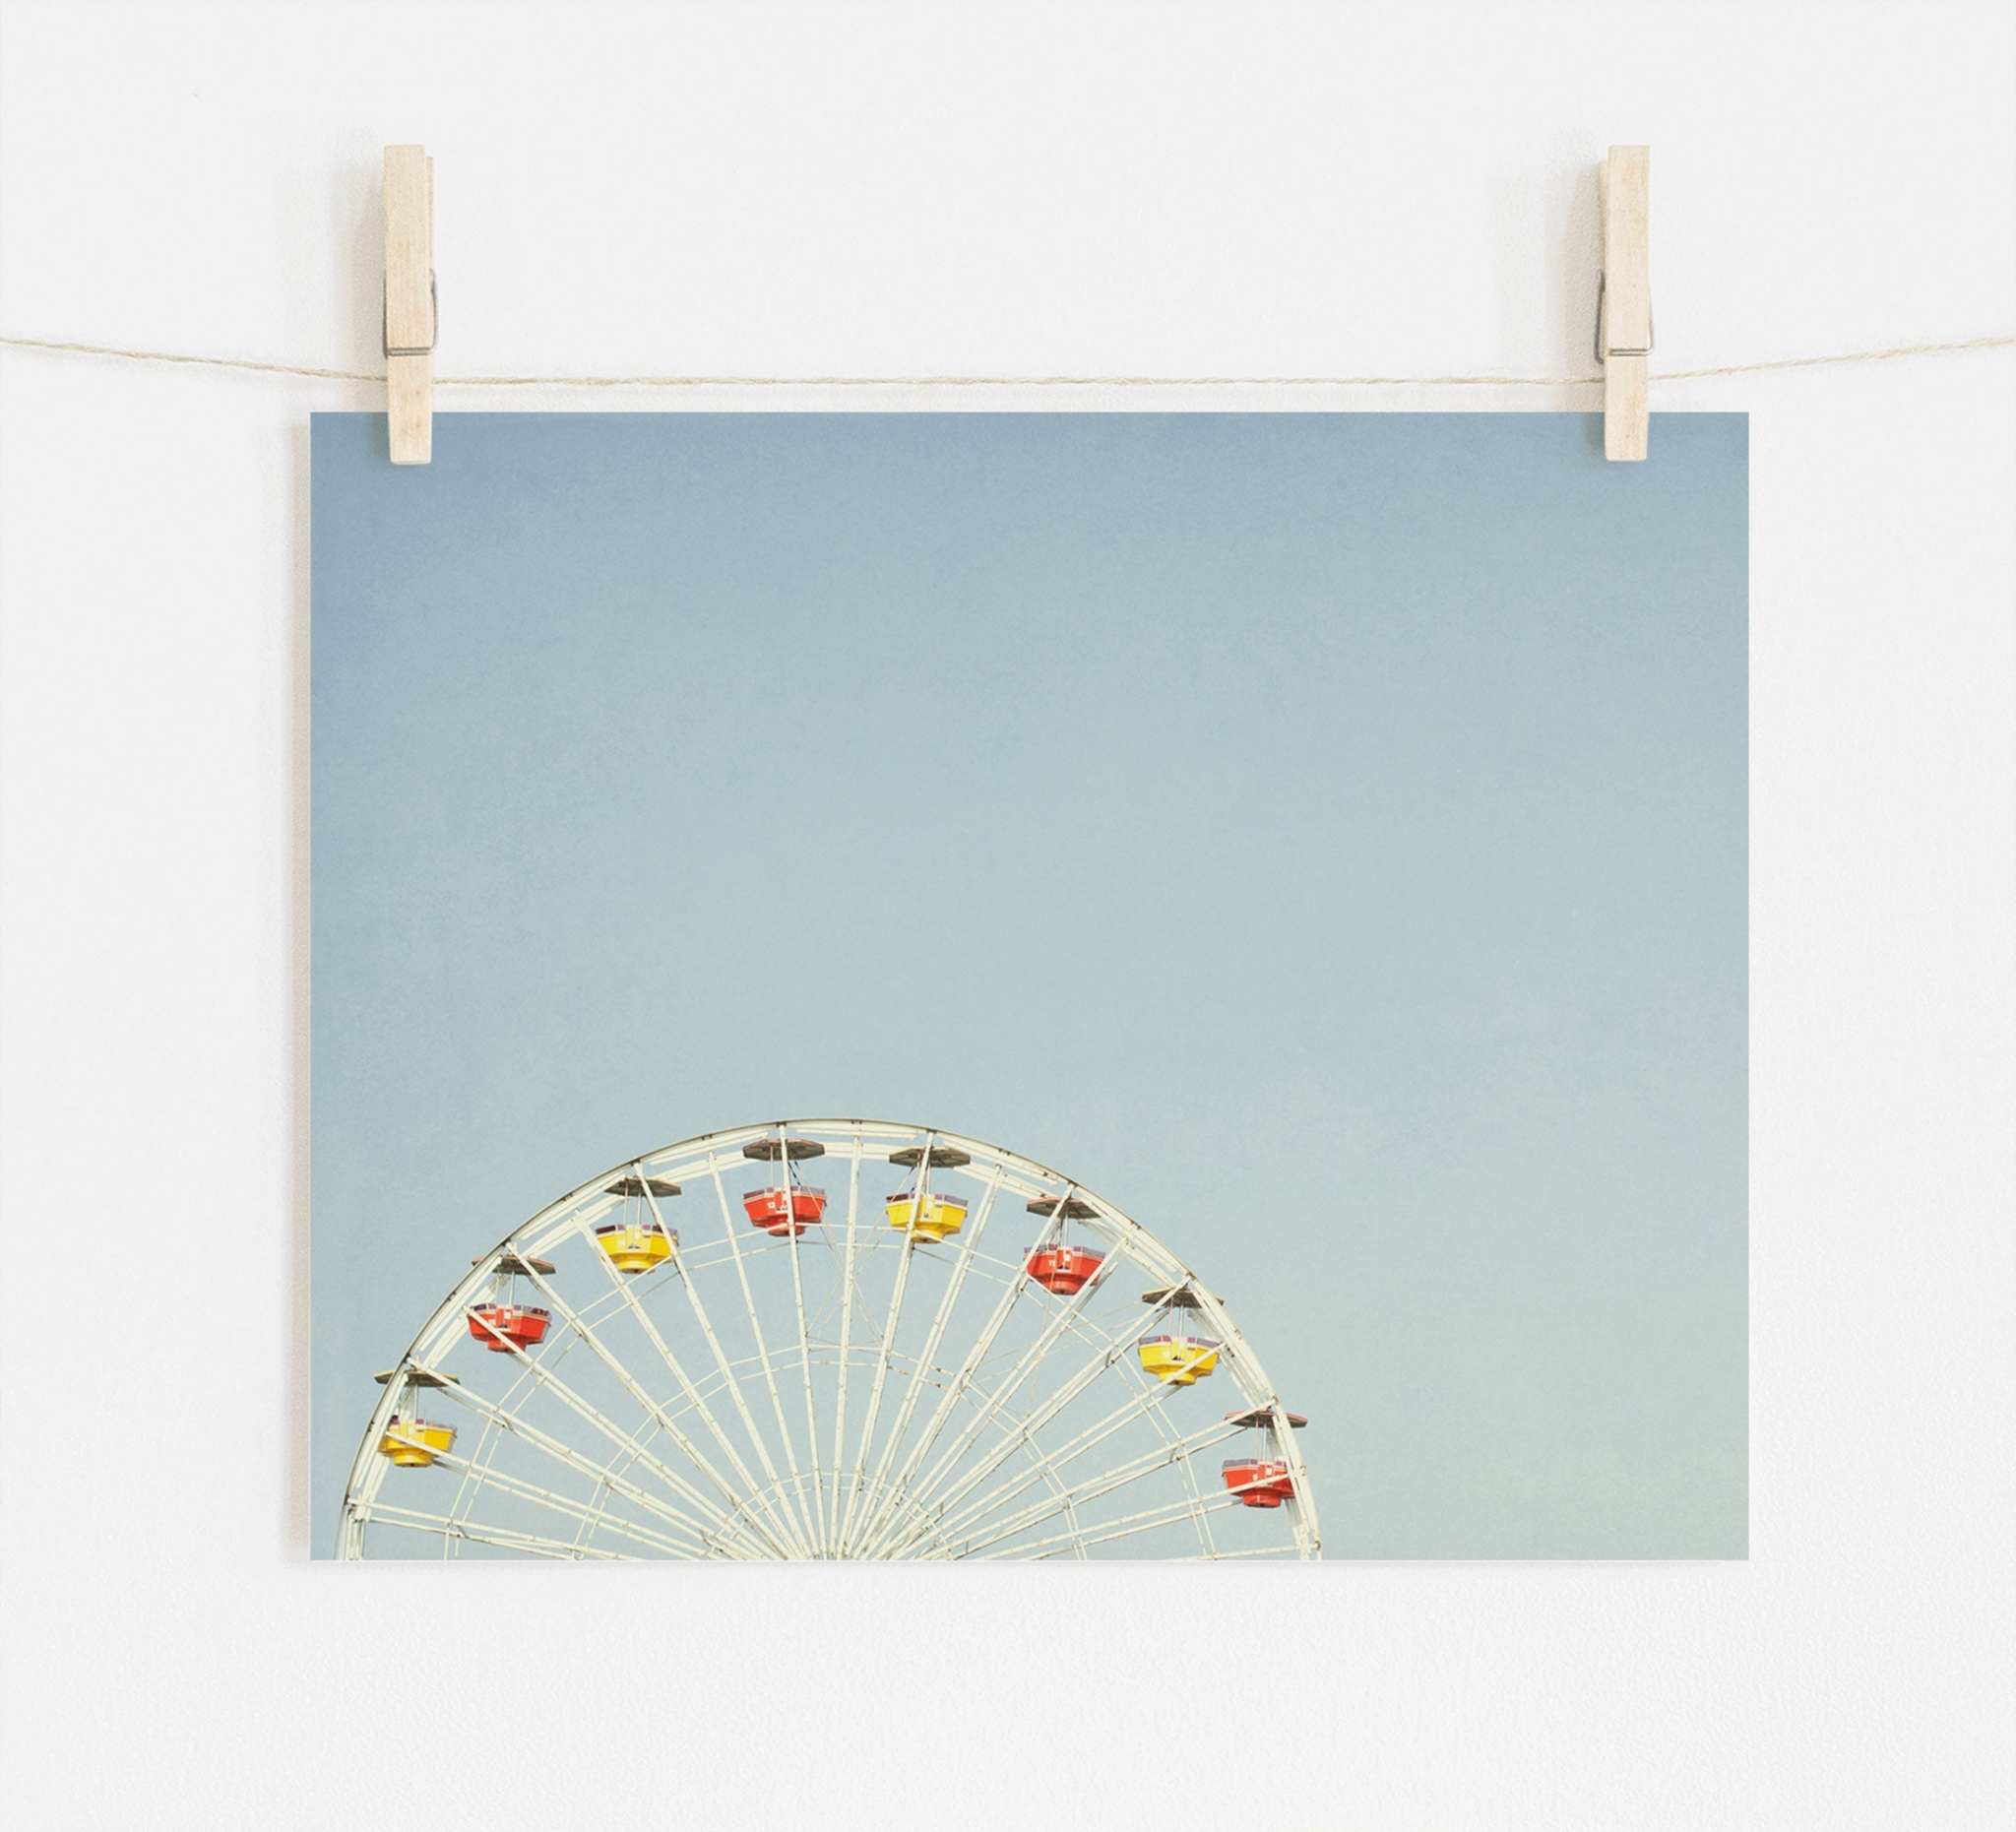 A photograph pinned by wooden clothespins on a string, depicting the top half of a ferris wheel with colorful cabins at Santa Monica Pier, set against a plain light blue background - Blue Minimalist Wall Decor, 'Ferris Blue' by Offley Green.